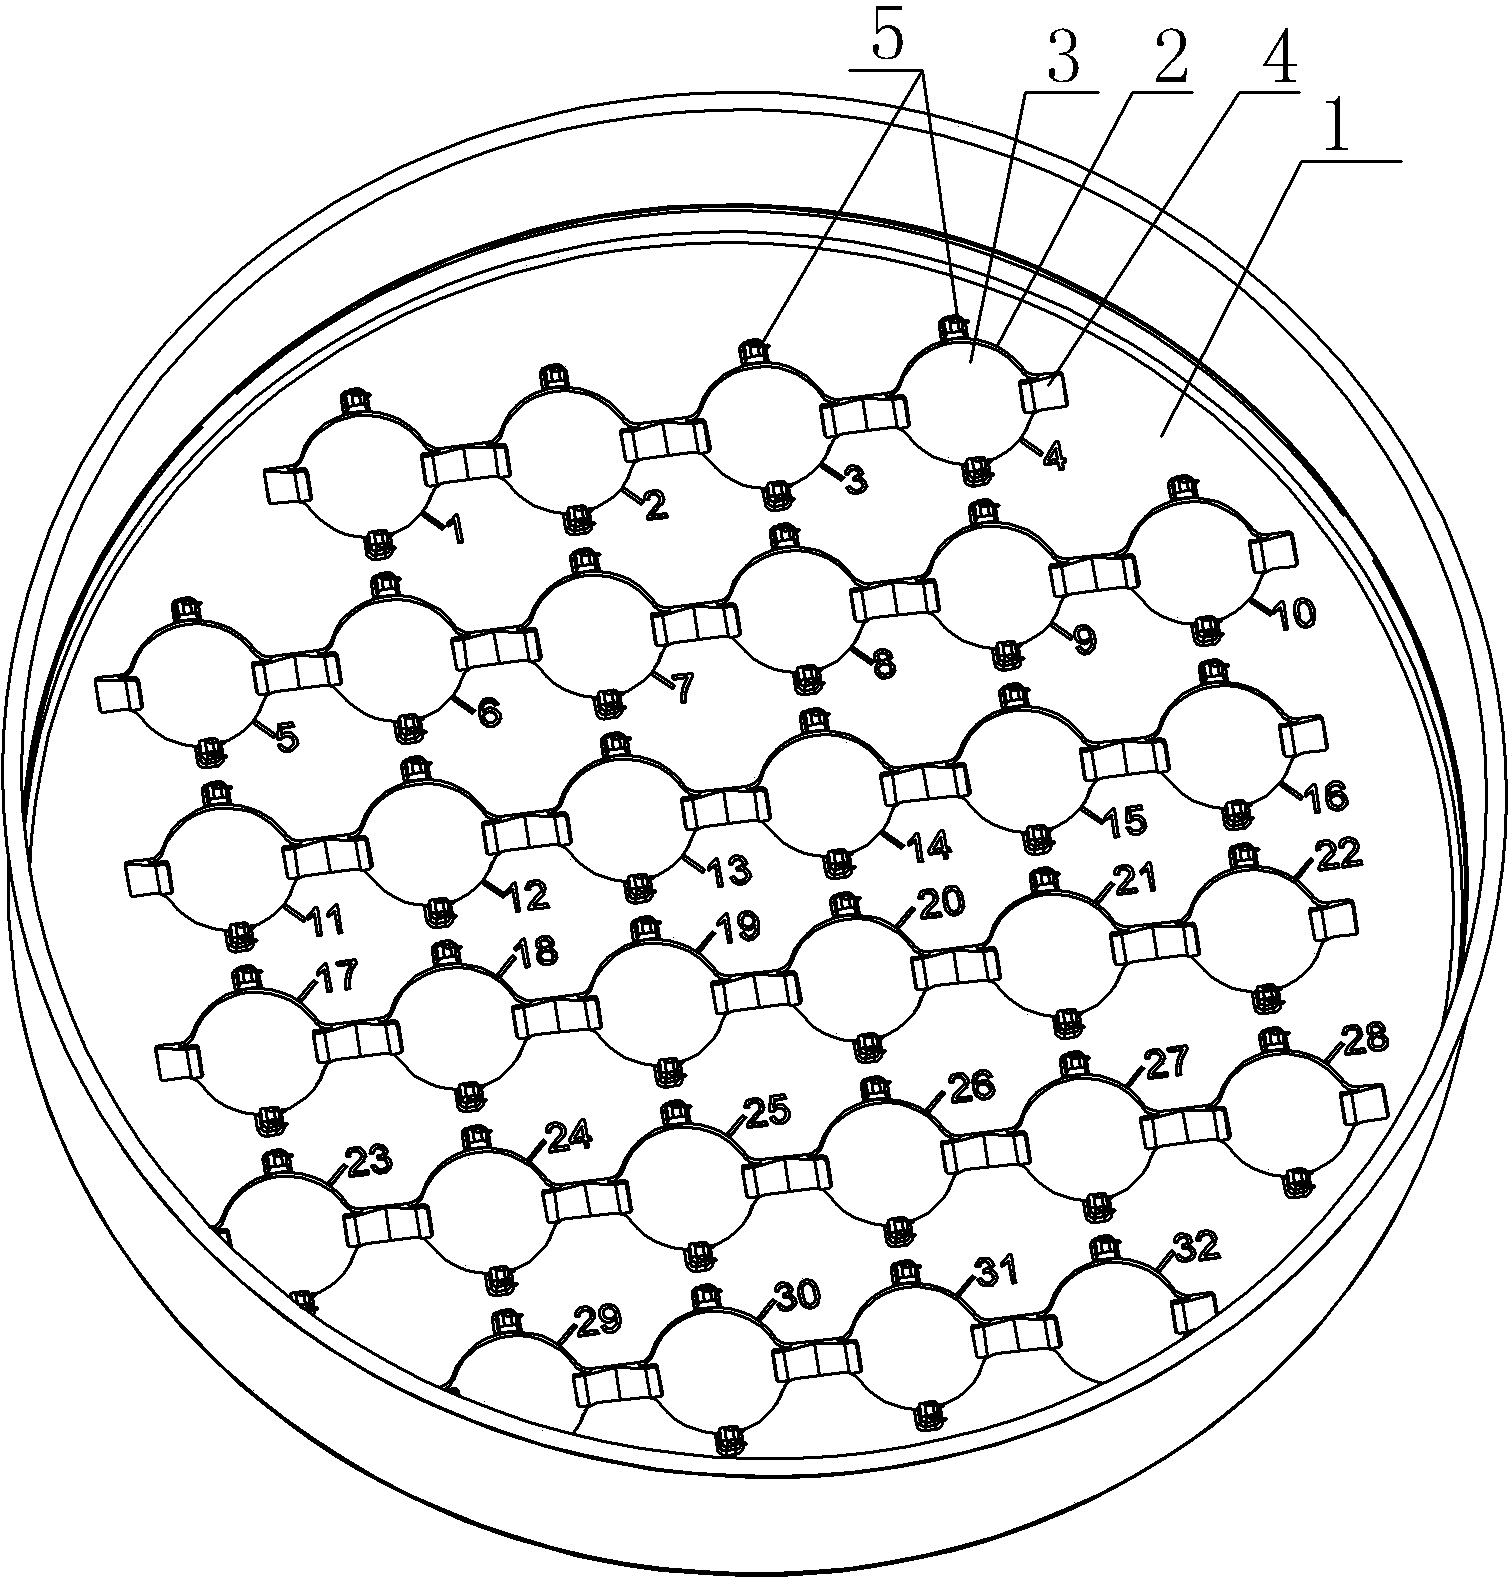 Multi-hole cell culture dish structure